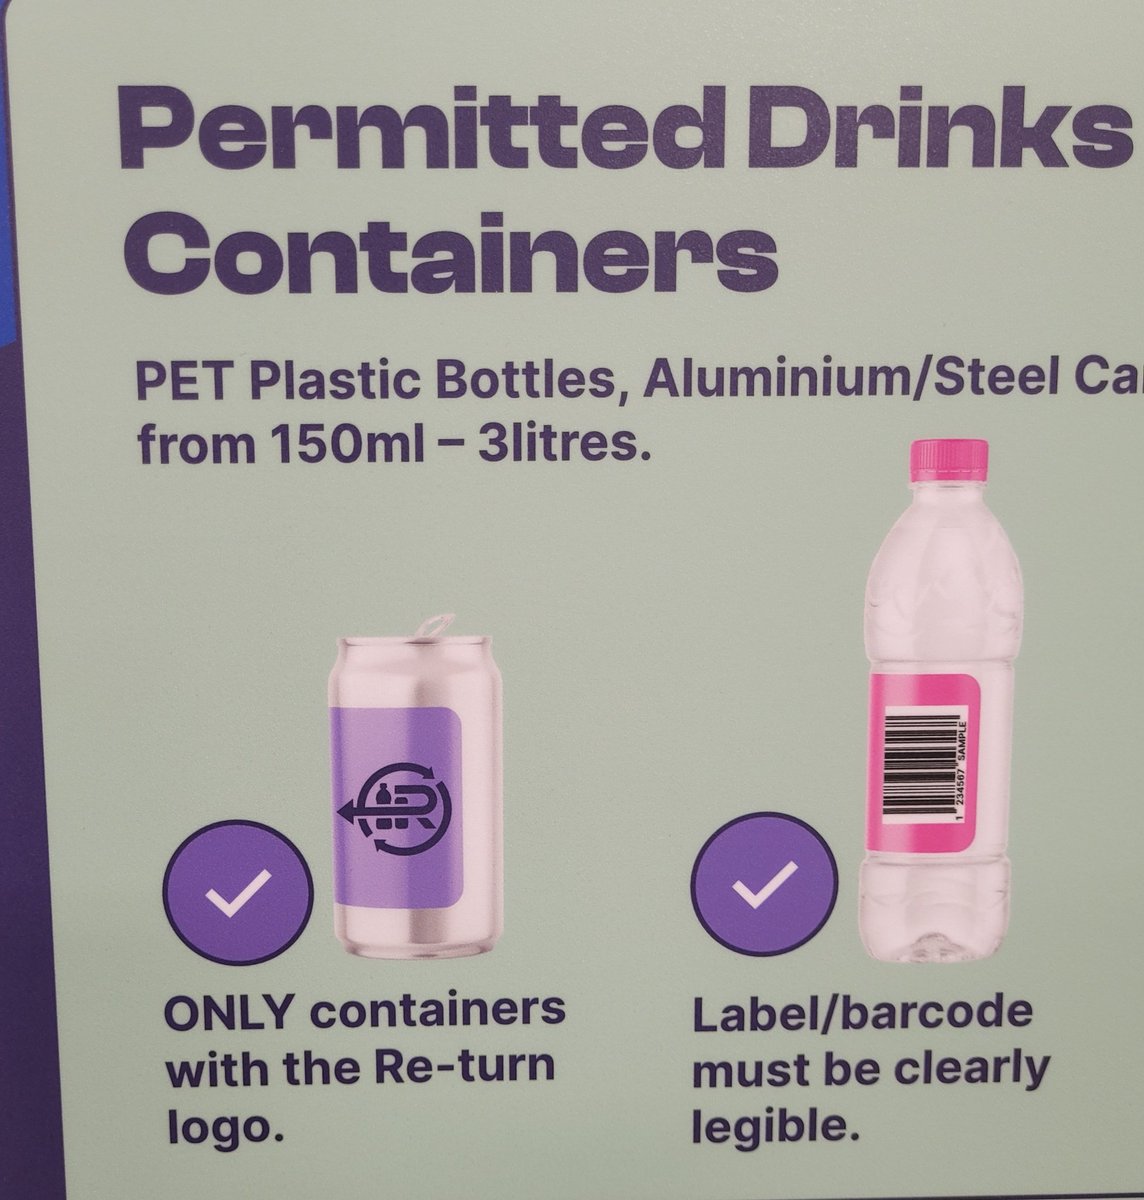 @returnireland During Transition the TRUTH is that one third (33%) to one half (50%) of the products in containers eligible for refund DID NOT have the Re-Turn Logo. Yet, Re-Turn did not change a single poster on the Reverse Vending Machines to tell the public this ... #NOReTurnLOGO (3/9)